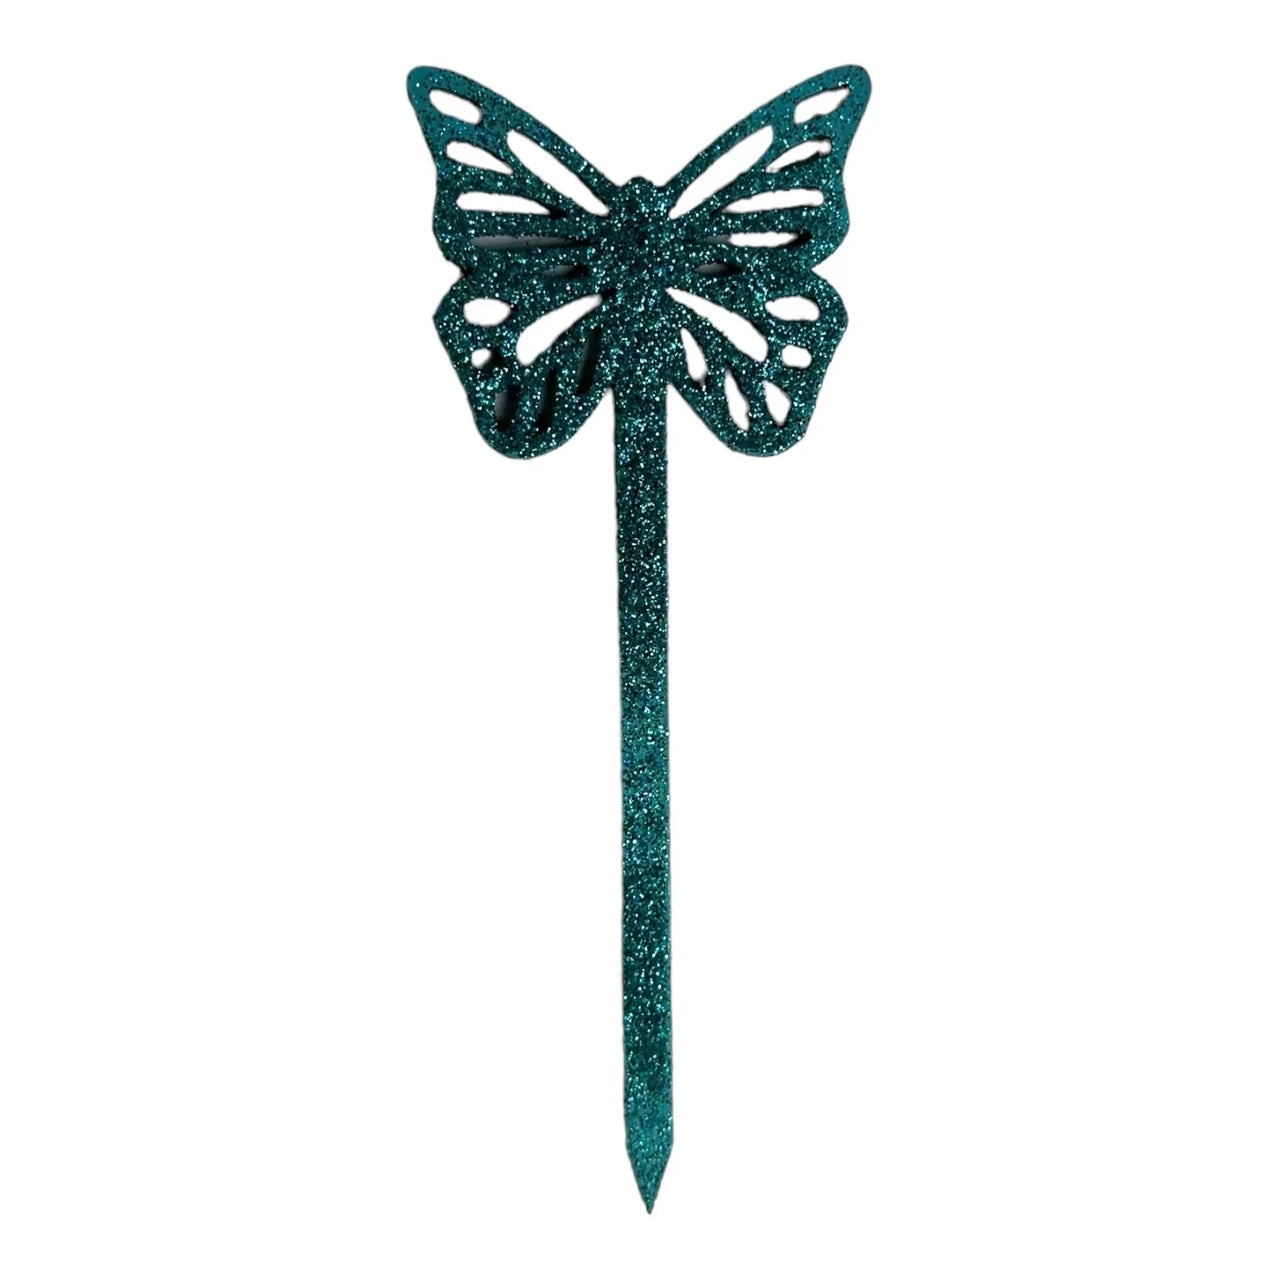 Handmade plant stakes with a difference - Sparkling Green Butterfly